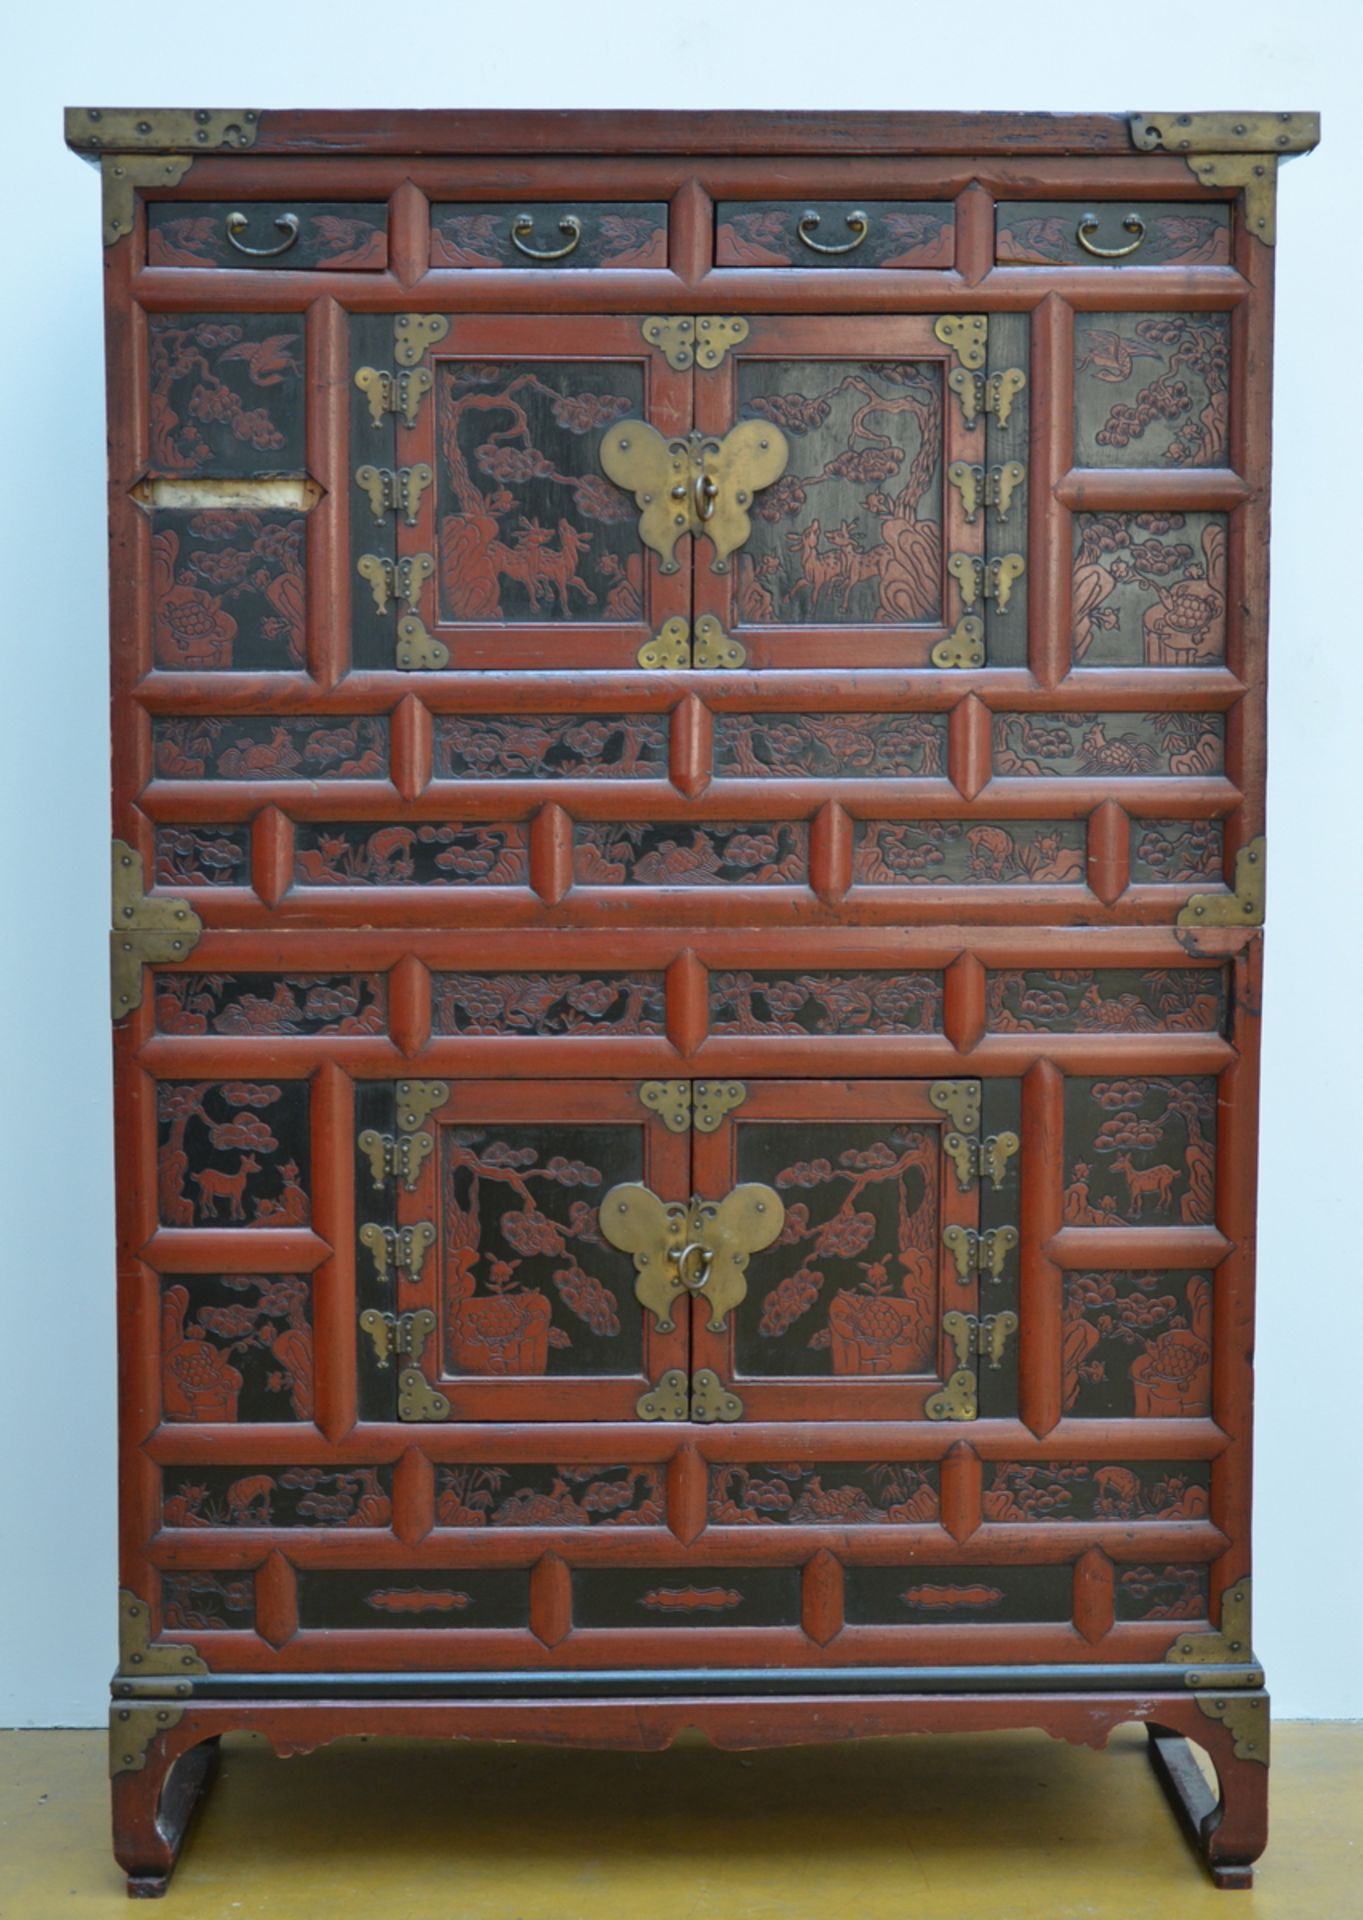 A Korean cabinet with lacquer decoration, Choseon dynasty (39x94x138cm)